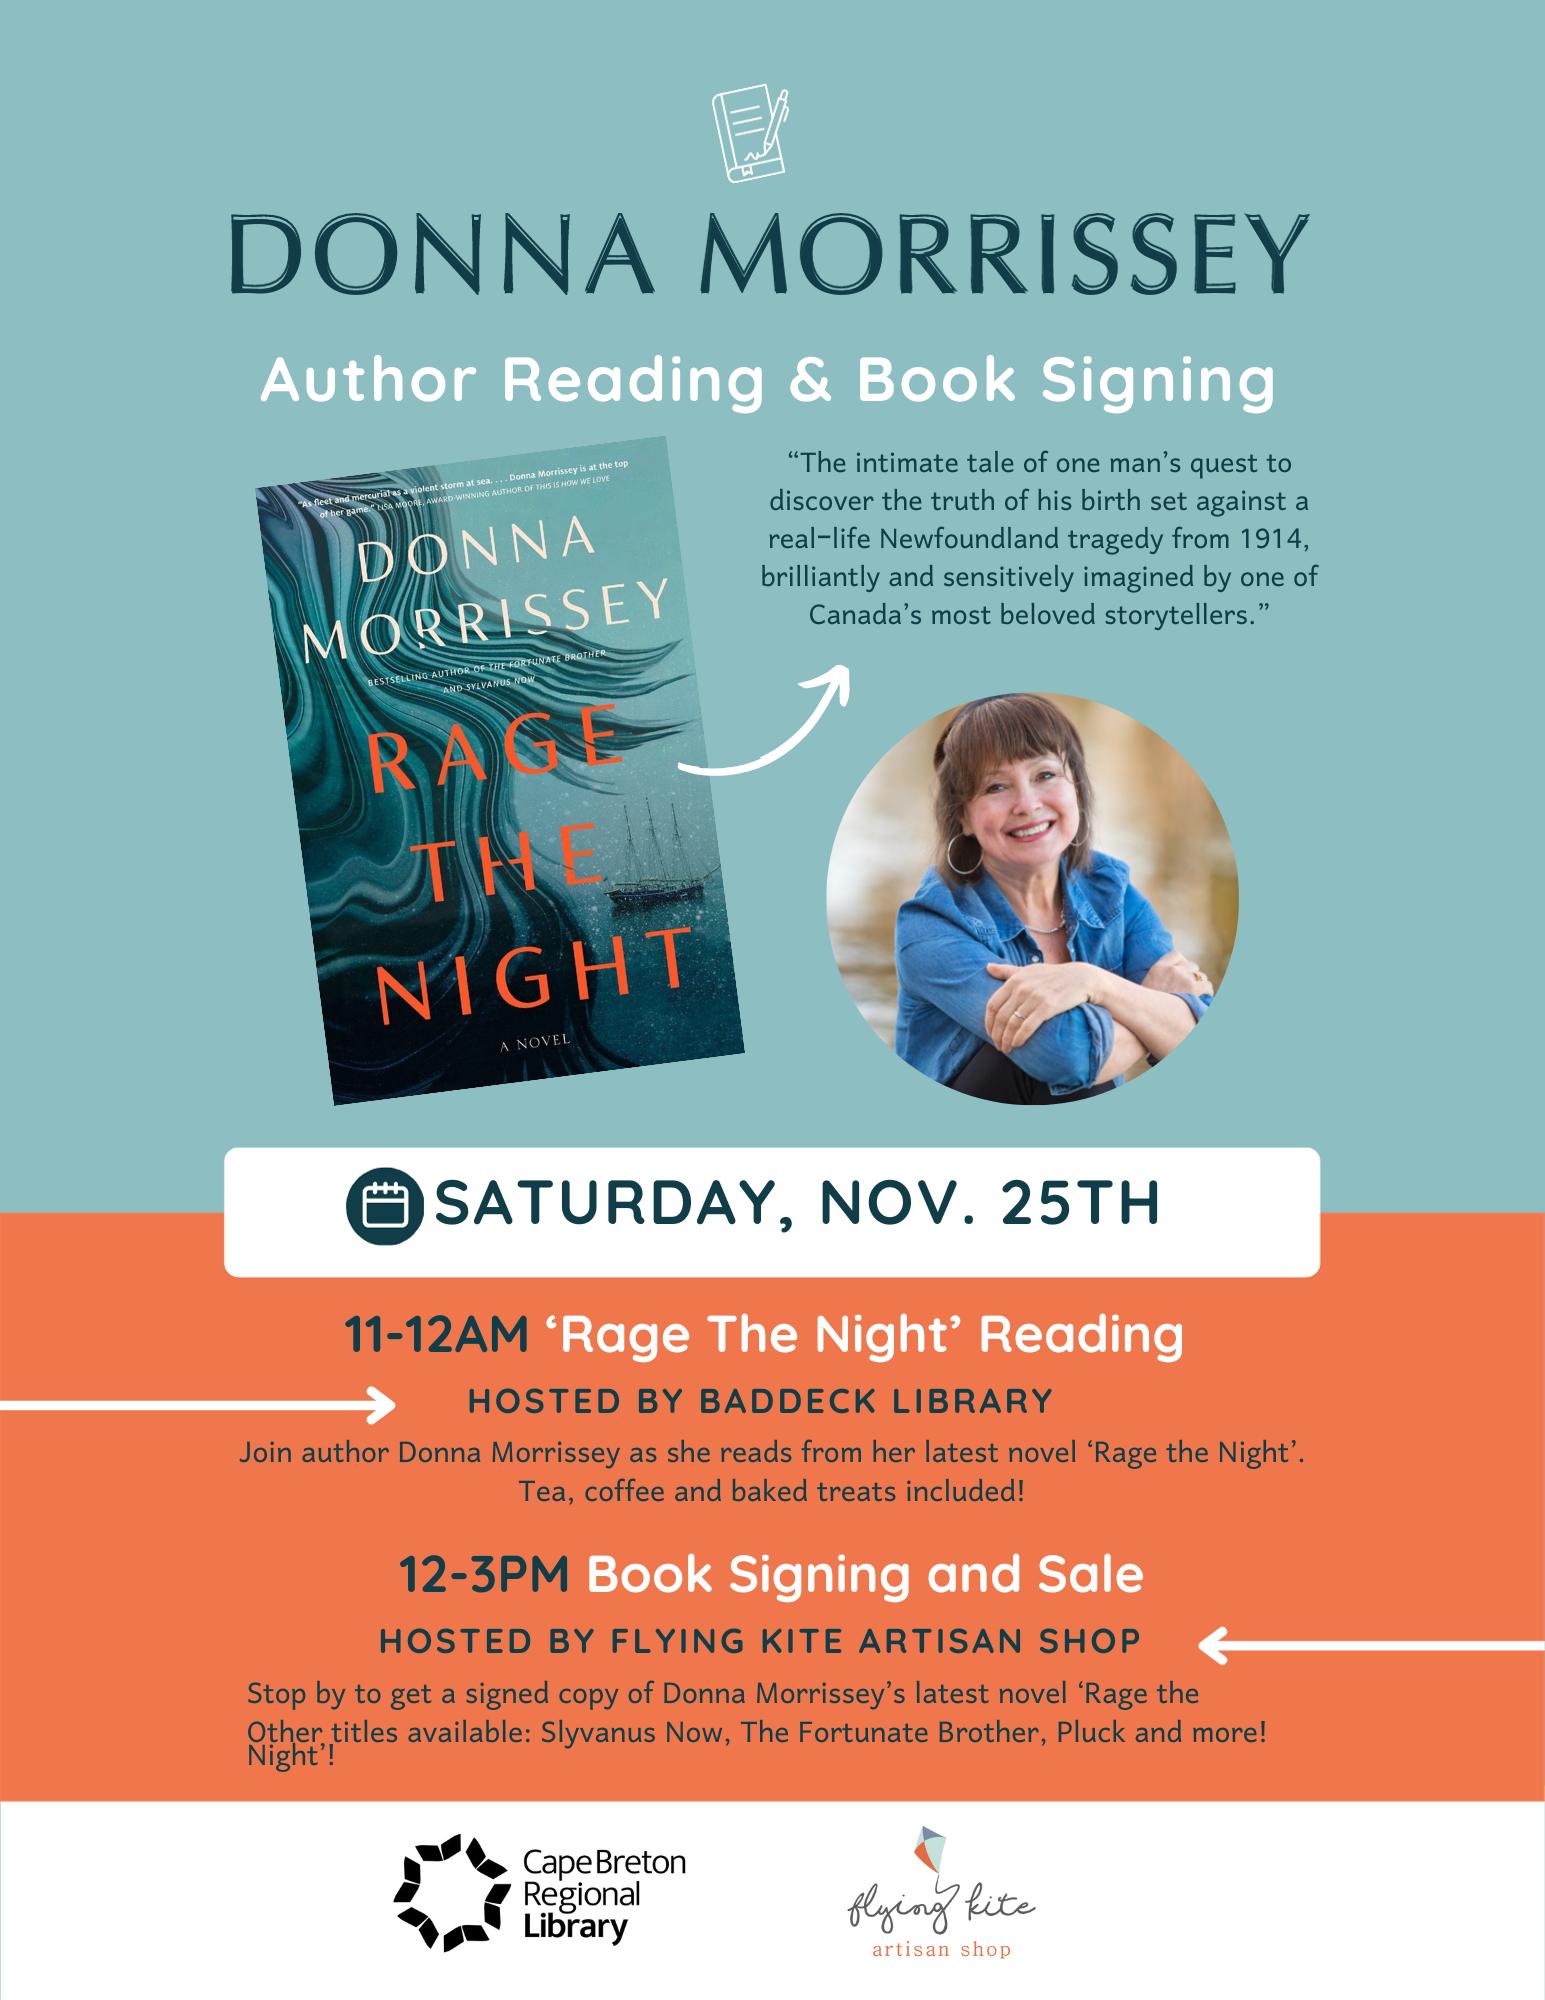 Donna Morrissey author reading and book signing.  Saturday November 25th, Baddeck Library 11am-12pm and Flying Kite Artisan Bookshop 12pm-3pm.